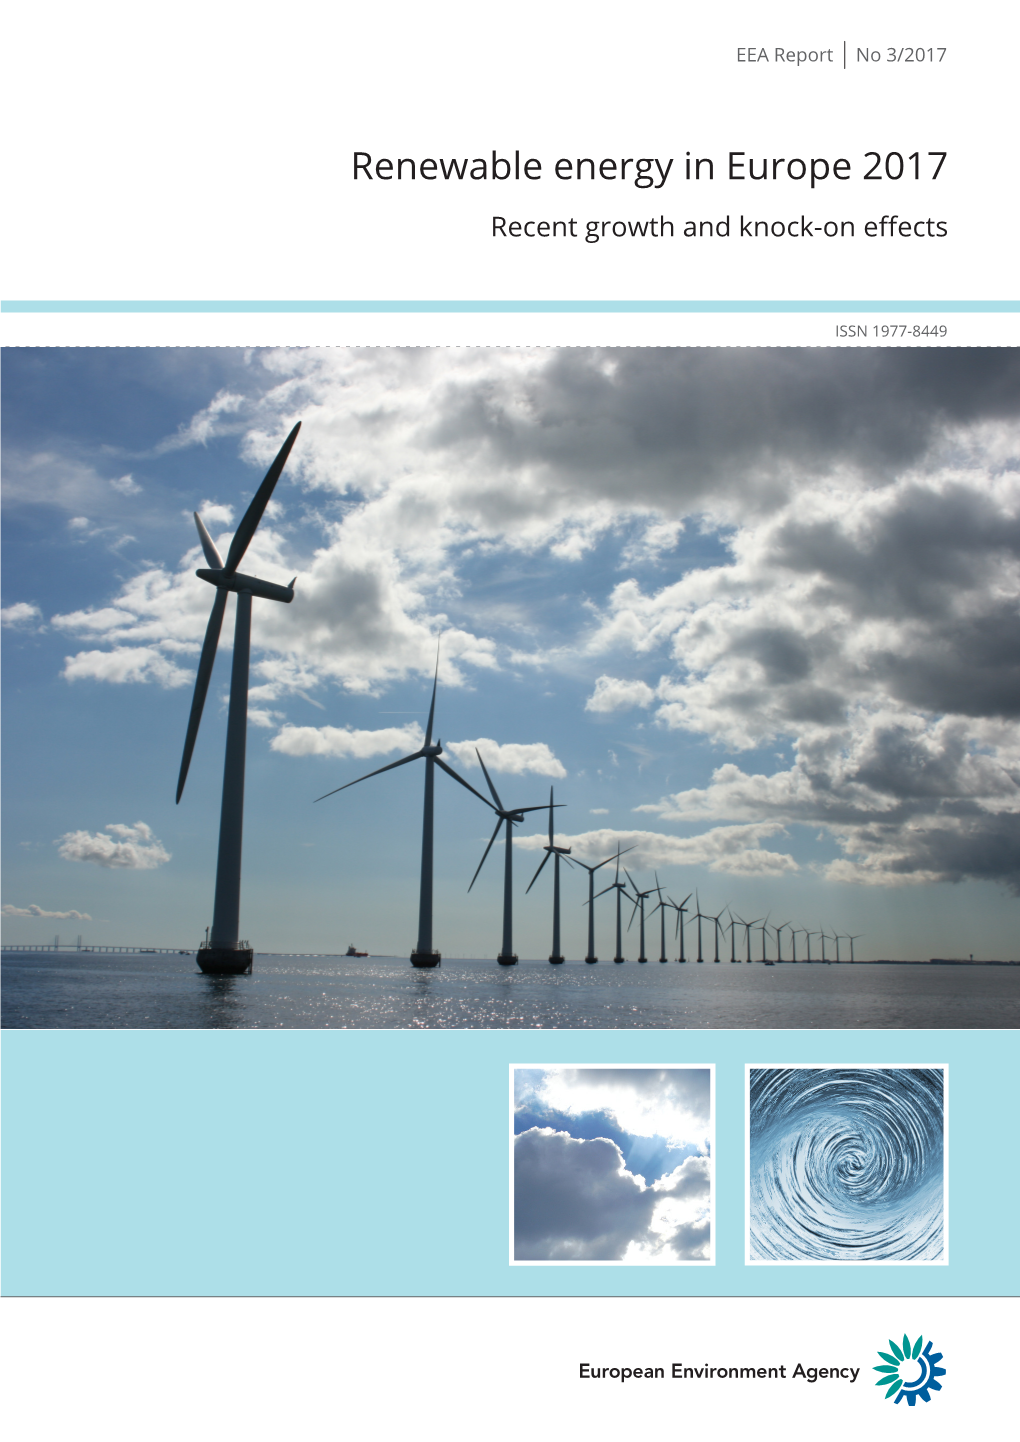 Renewable Energy in Europe 2017 — Recent Growth and Knock-On Effects